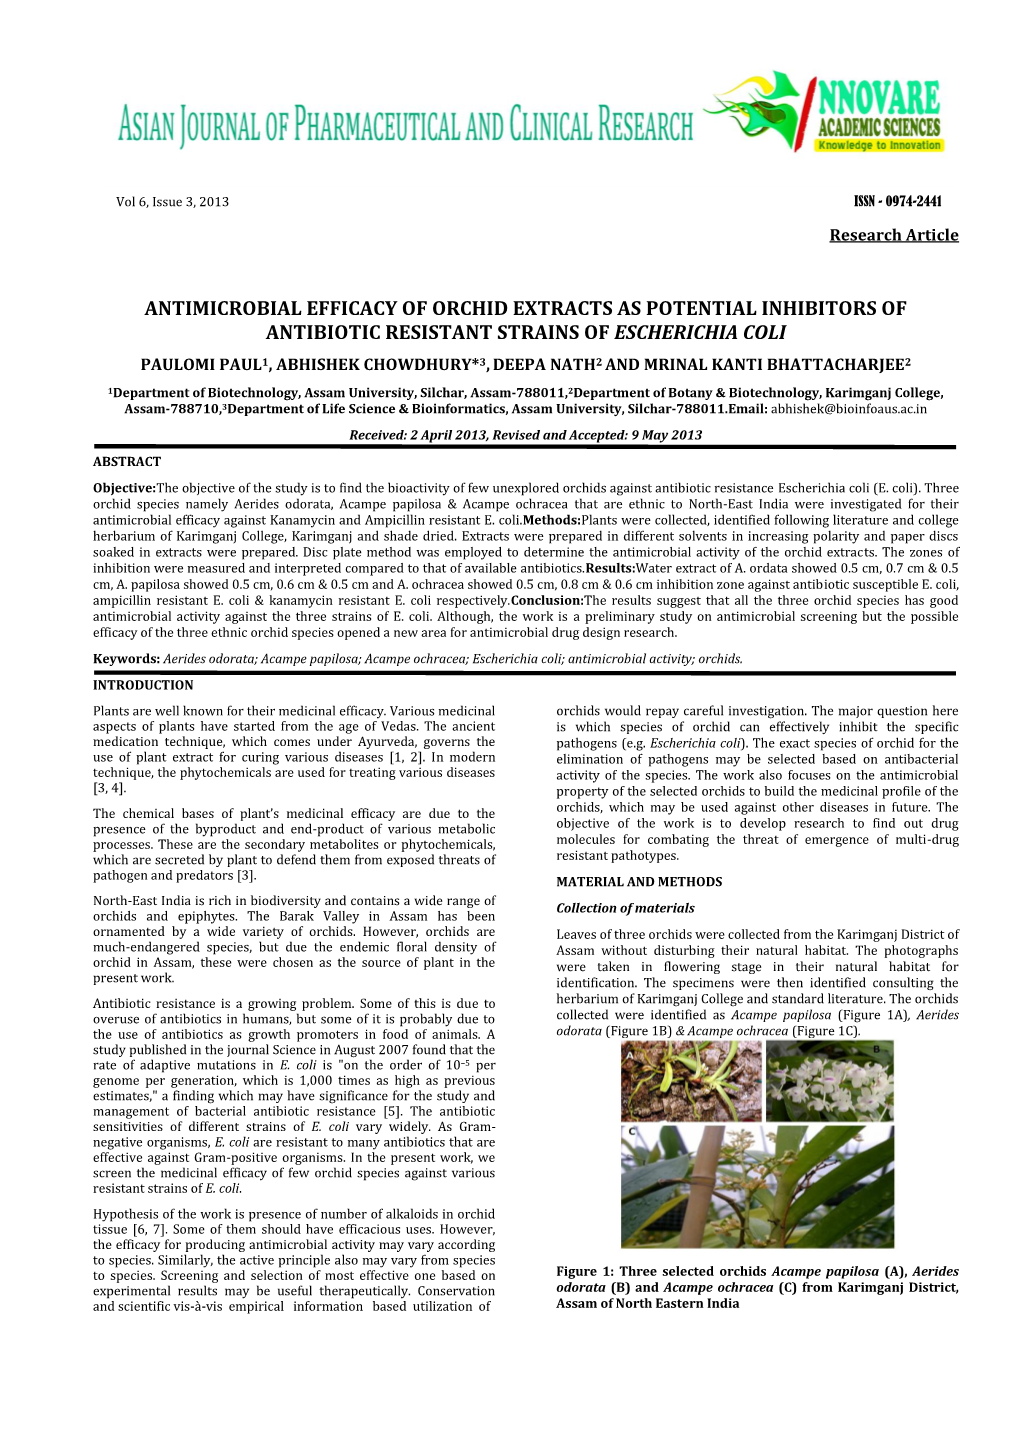 Antimicrobial Efficacy of Orchid Extracts As